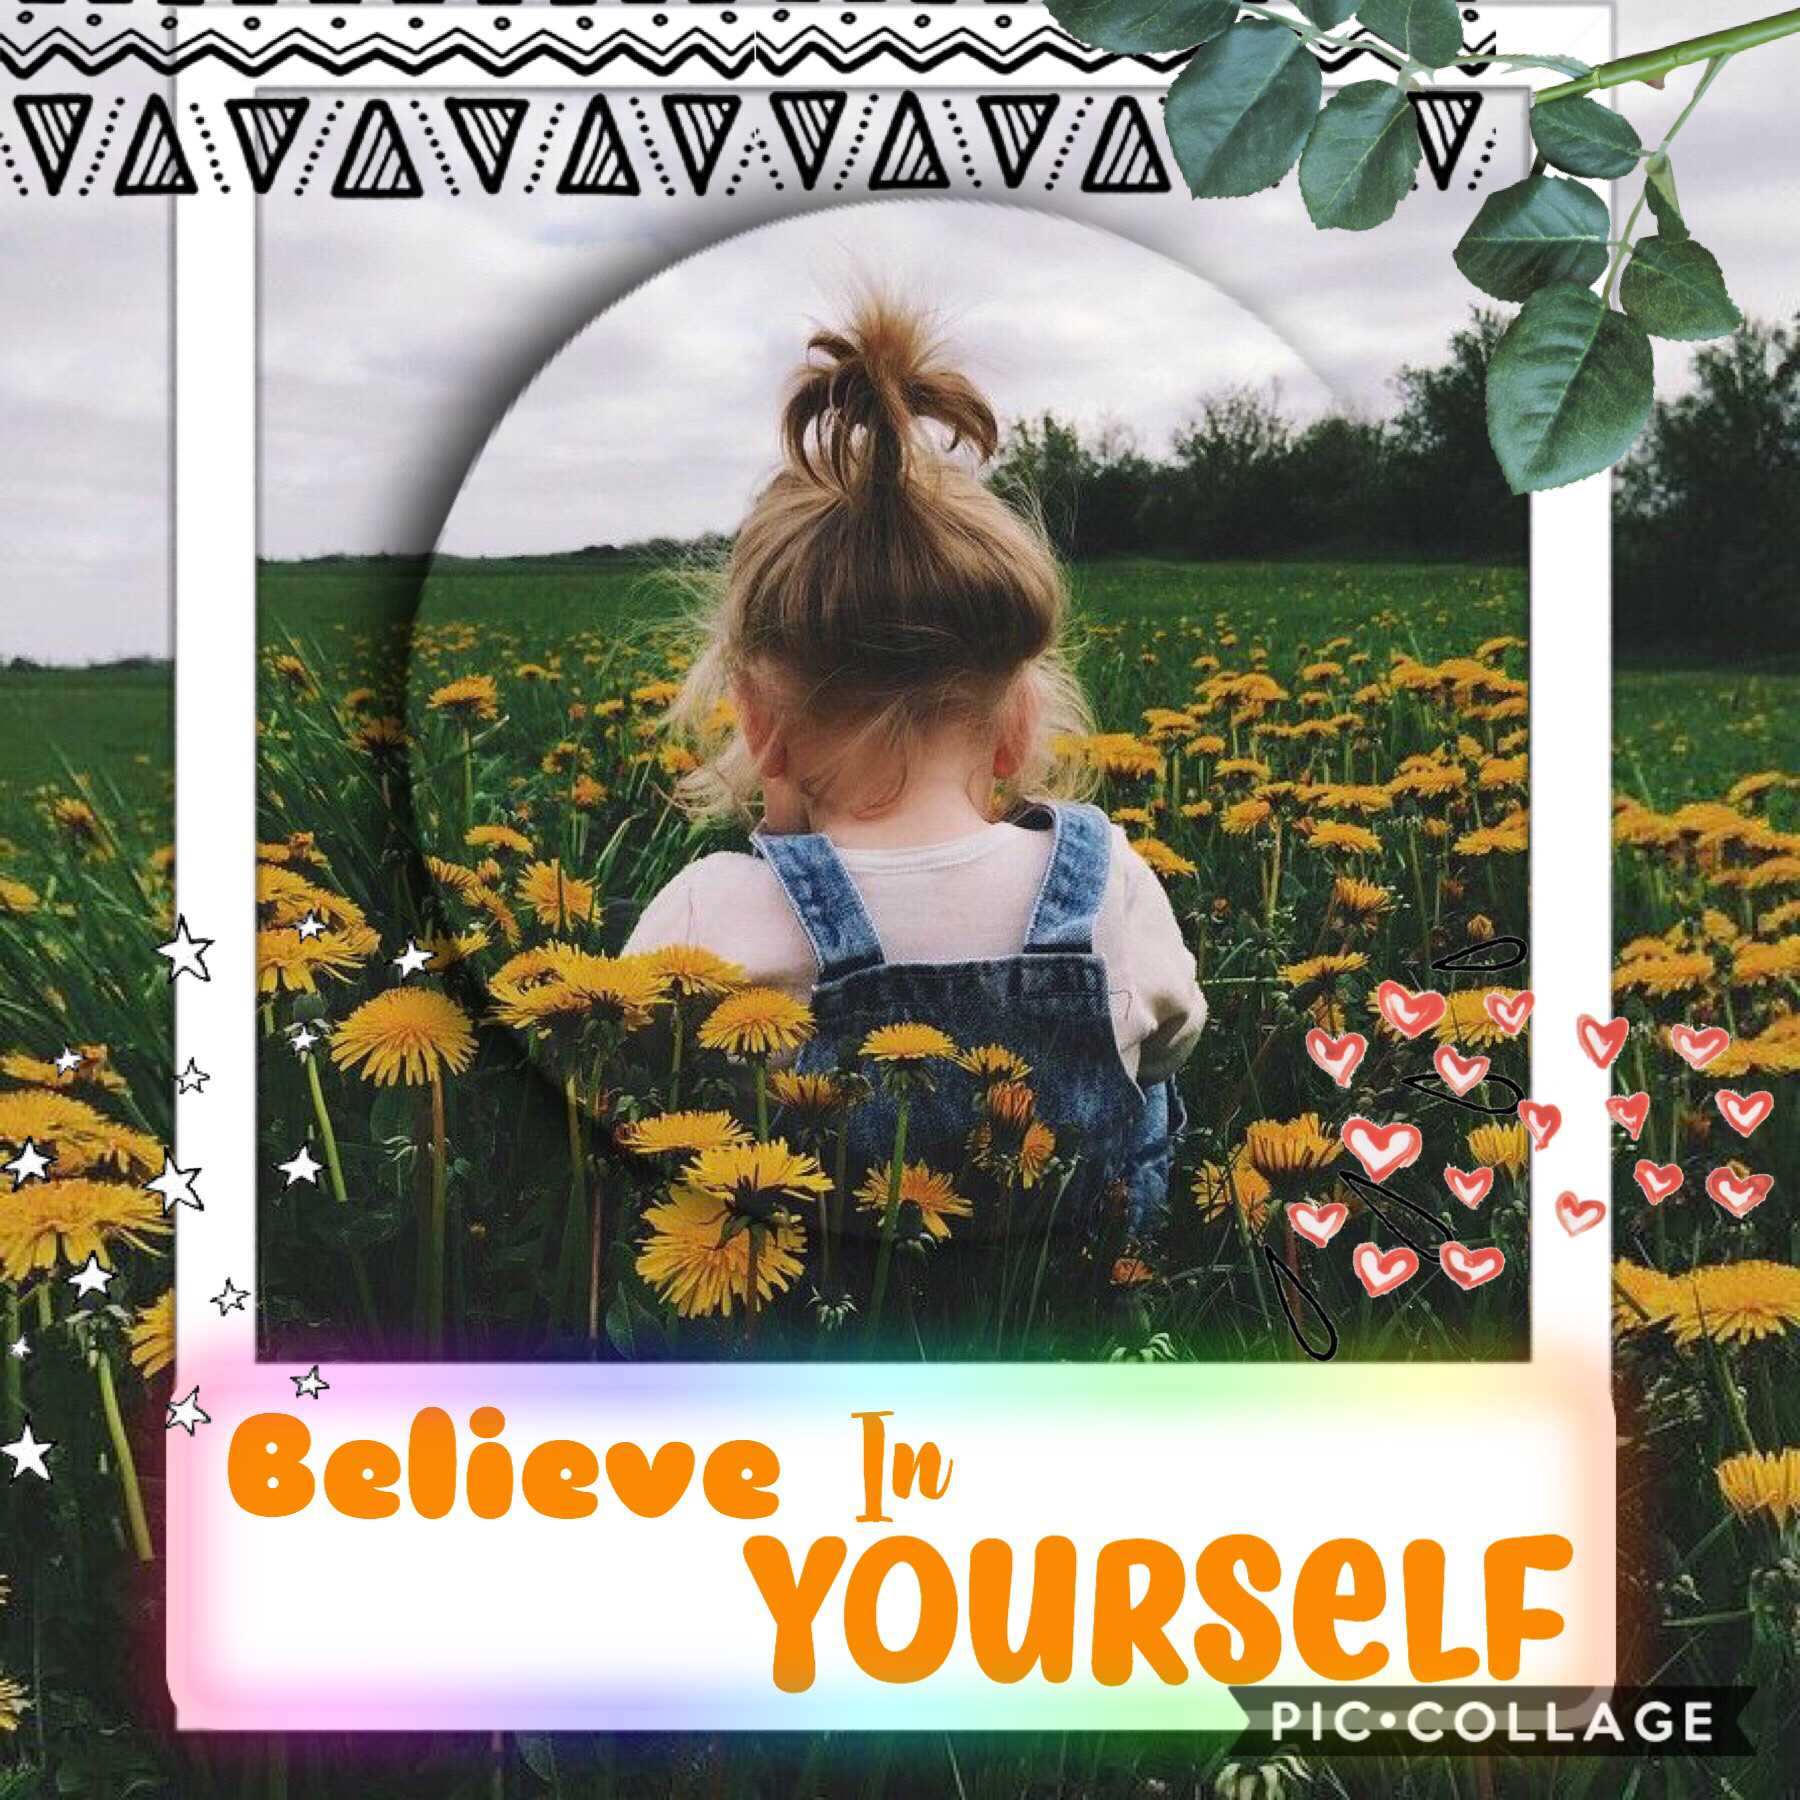 always believe in yourself. everyone please enter my icon contest. it ends in 4 days. sorry if i’m being annoying. anyway thank you everyone and love you all x